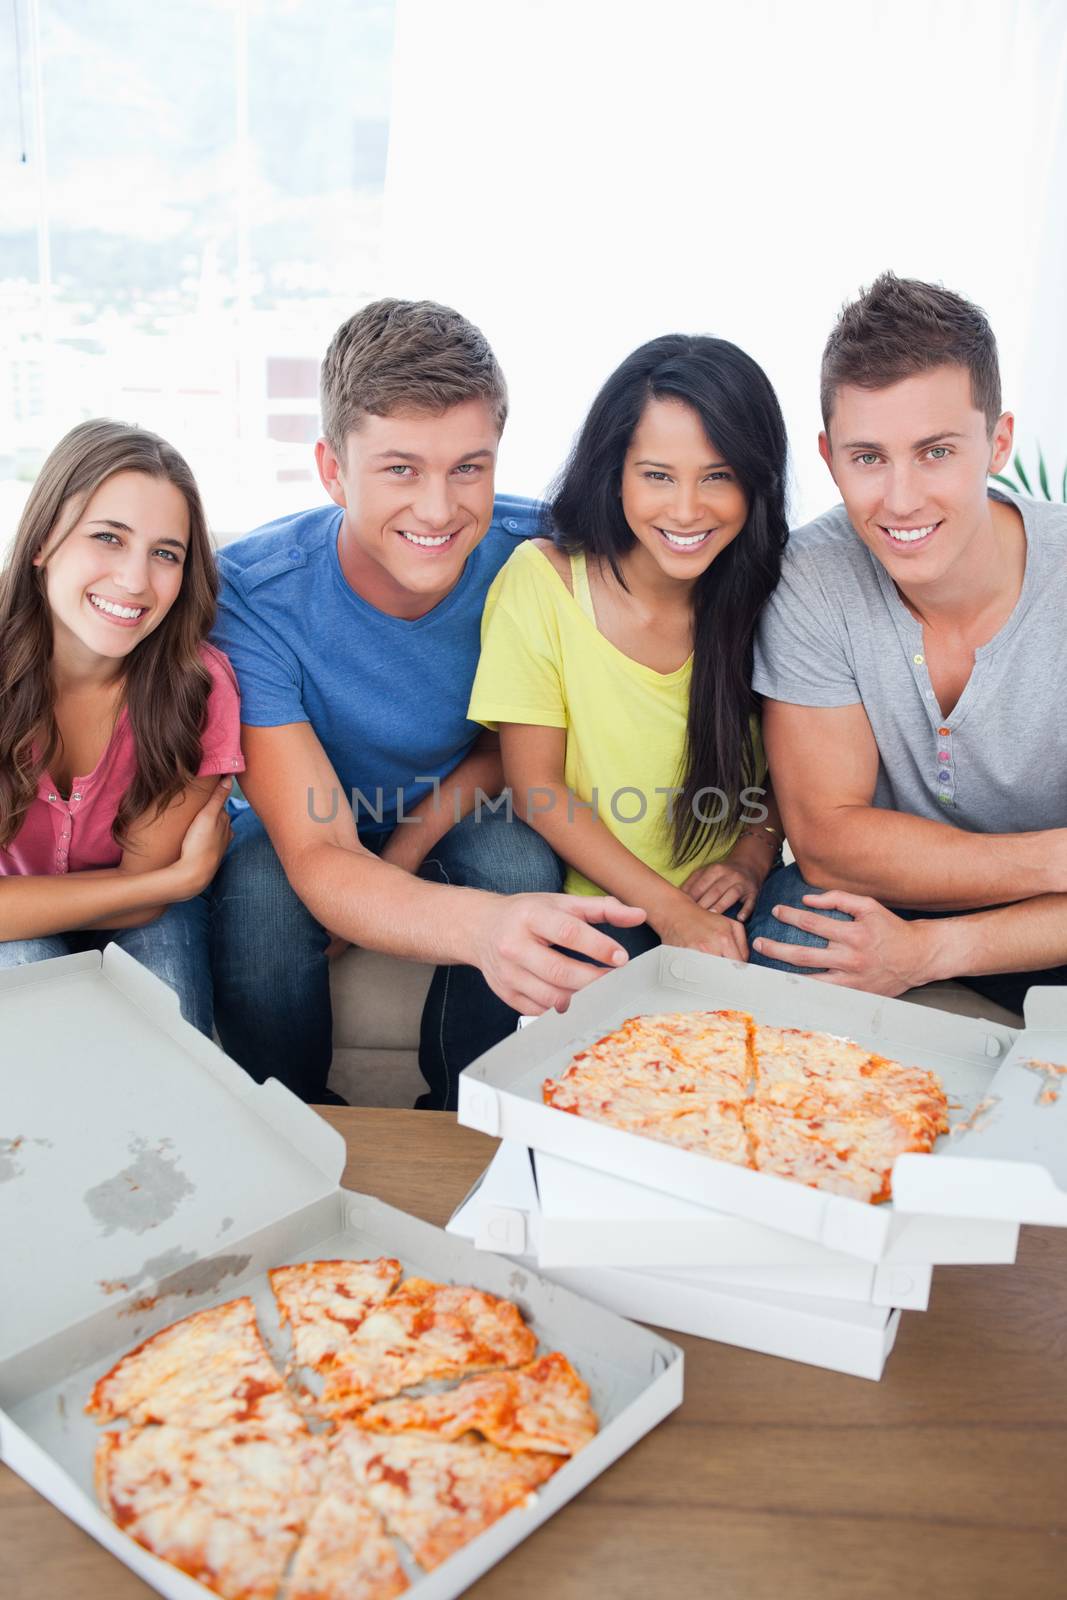 A smiling group of people about to eat as they look at the camera